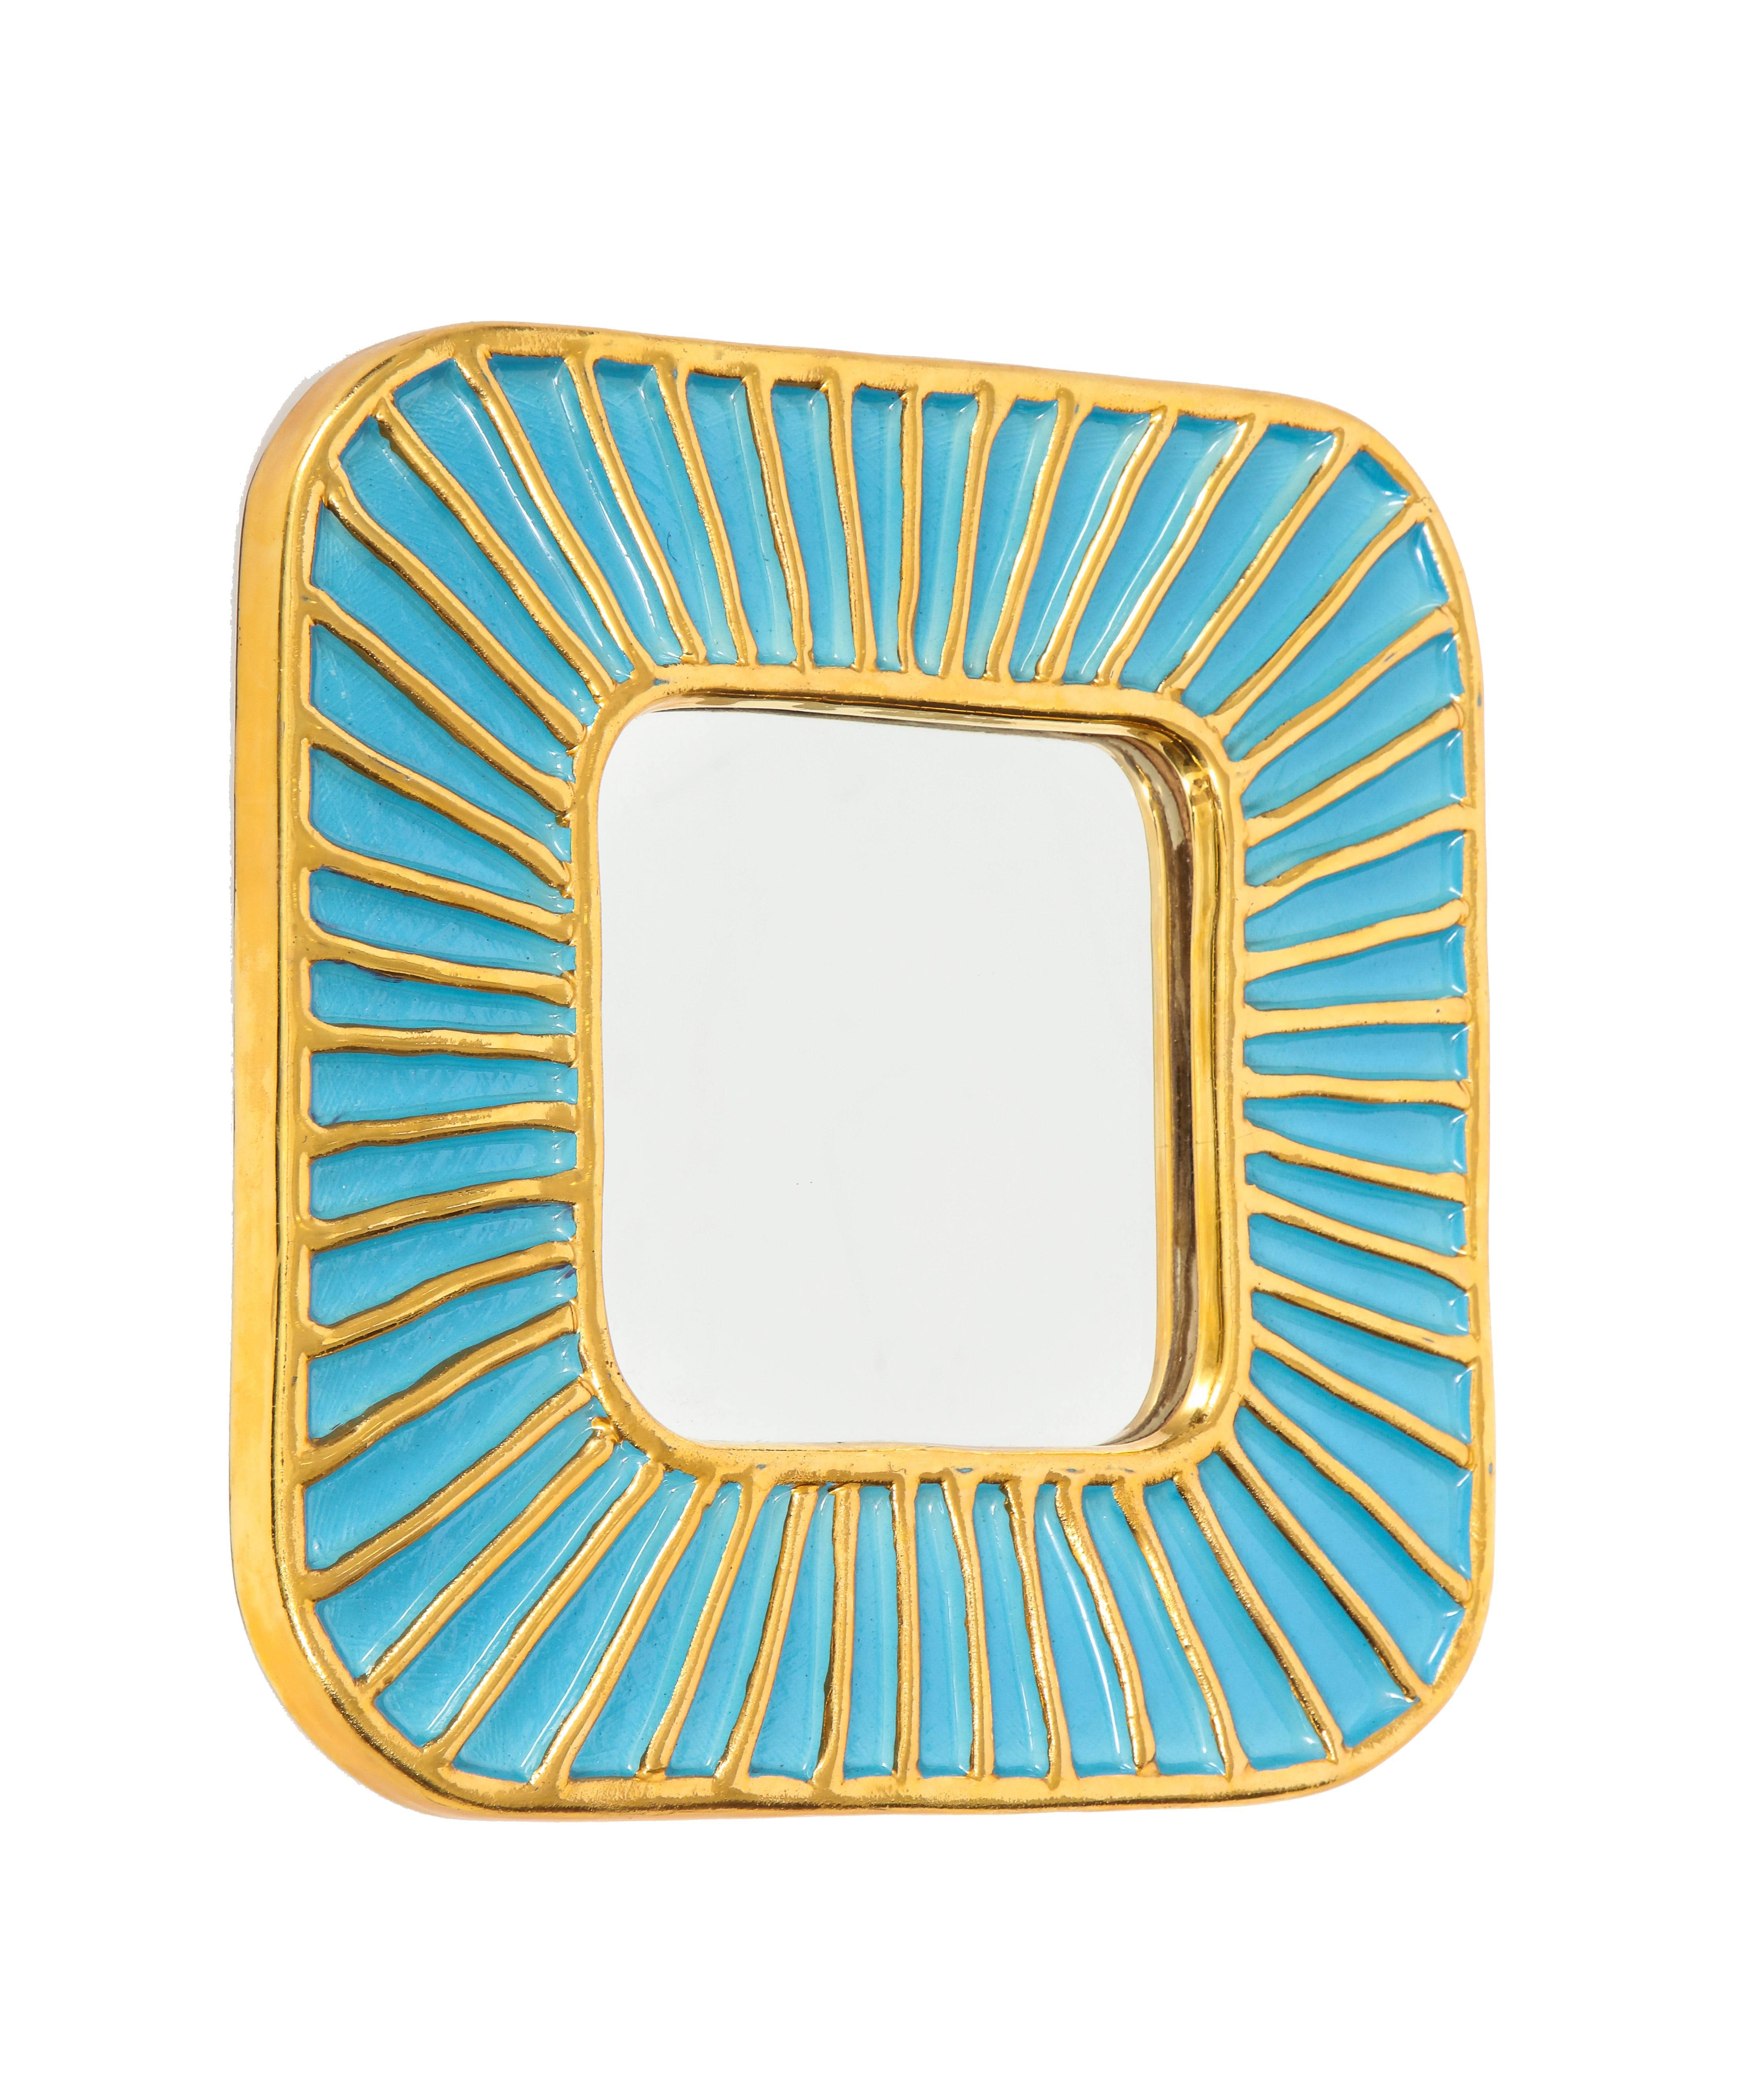 Francois Lembo ceramic mirror turquoise gold signed France, 1970s. Turquoise glaze ceramic mirror with gold sun ray pattern. Signed Lembo in script on verso of the mirror.

A native of Vallauris François Lembo started his pottery career in 1951 in